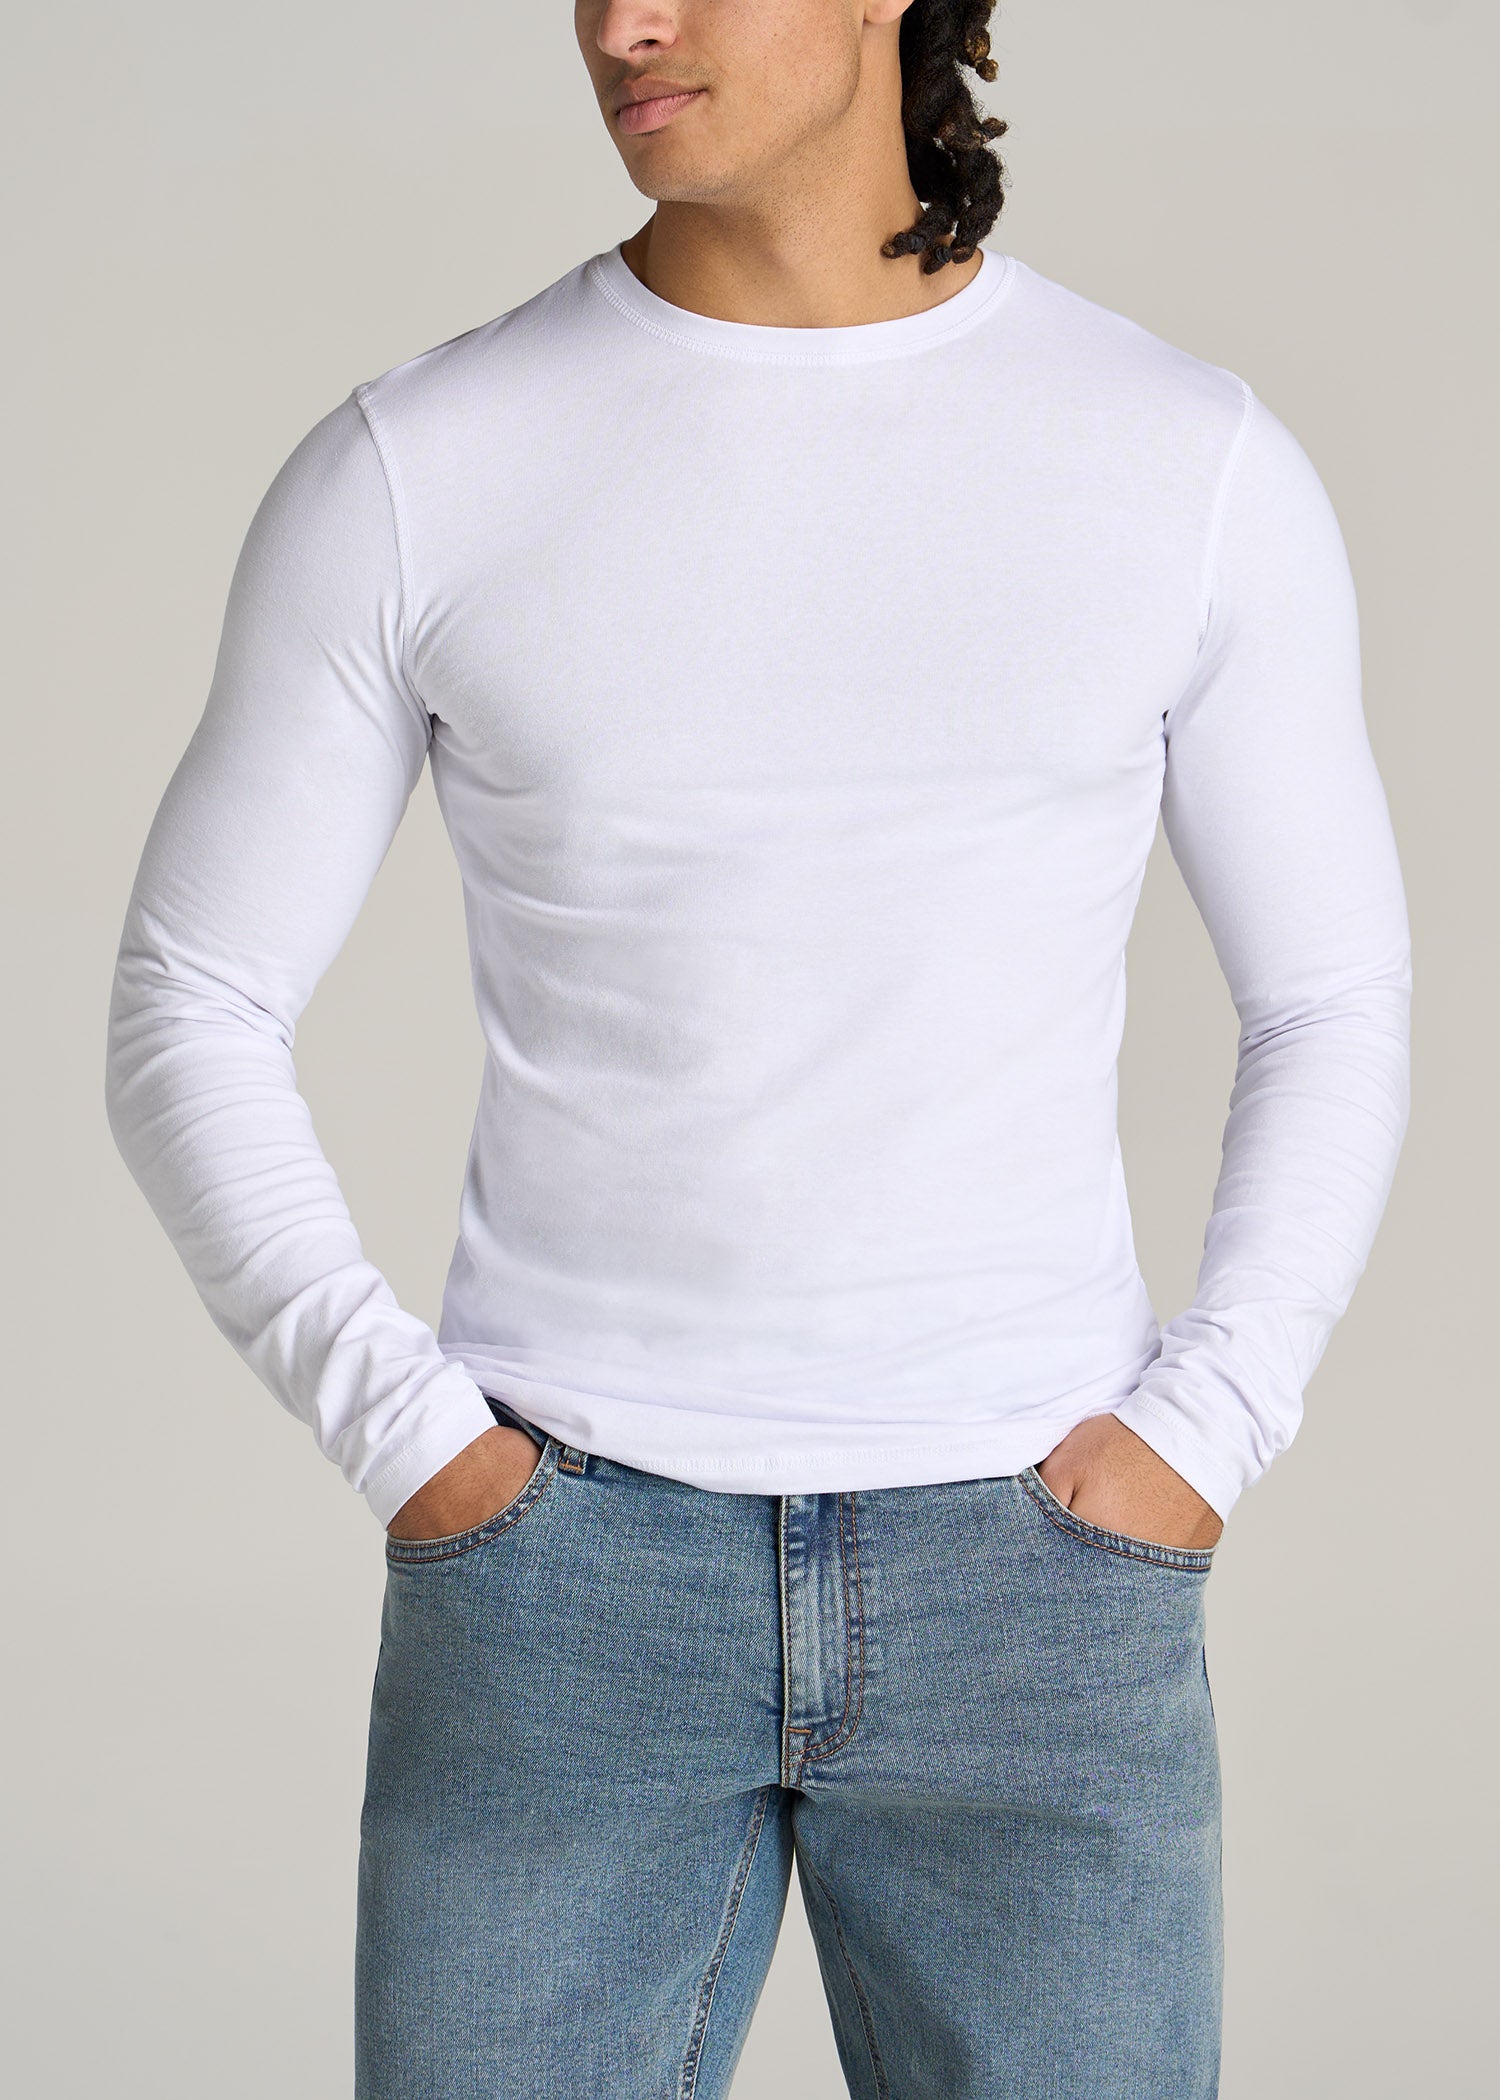 FITTED Pure white Shirt Slim Fit White Men Shirts